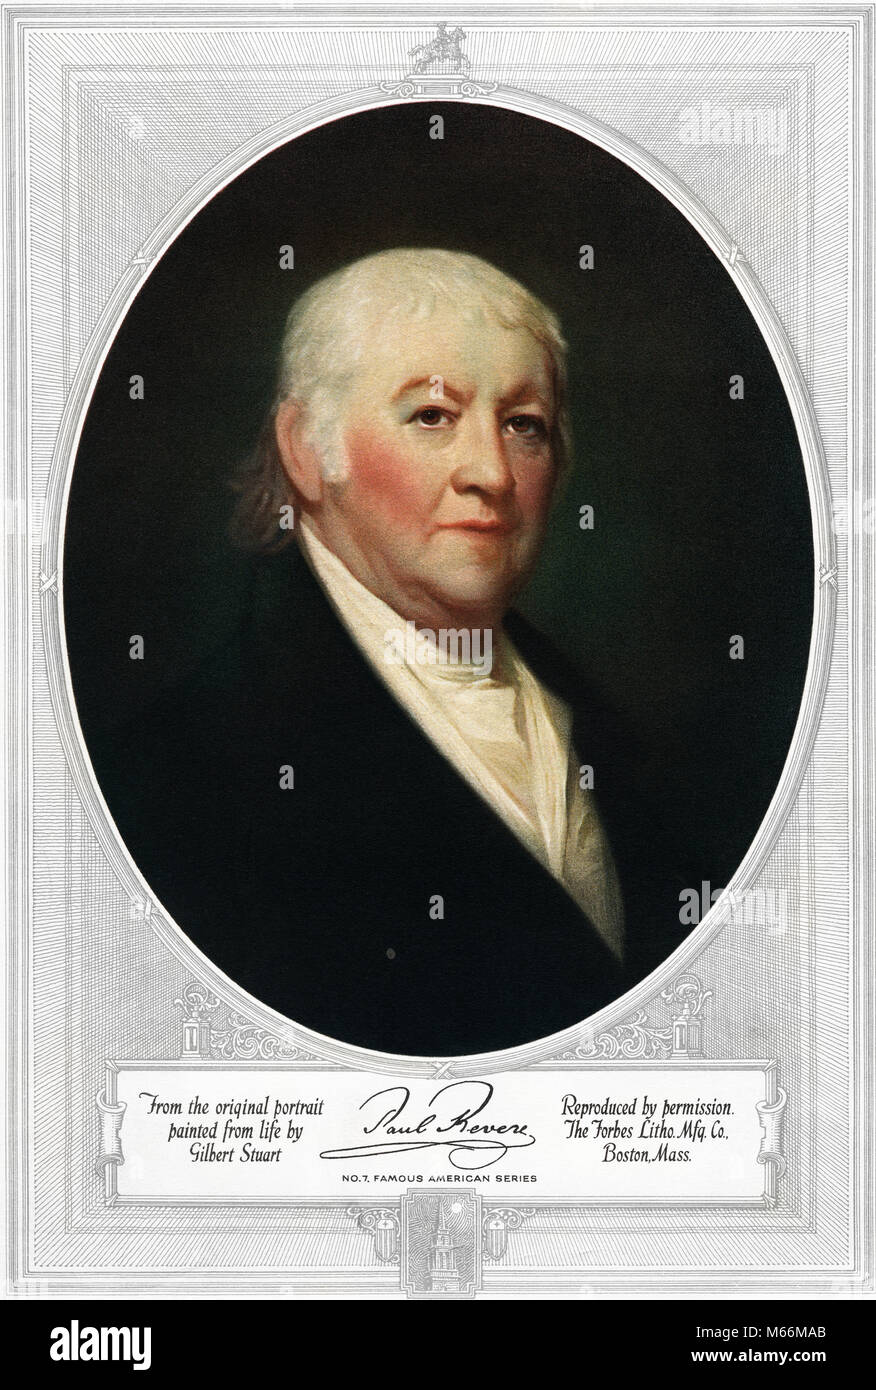 1800s 1813 PORTRAIT OF PAUL REVERE AMERICAN PATRIOT AND SILVERSMITH LOOKING AT CAMERA BY GILBERT STUART COLOR HALFTONE - kh13248 CPC001 HARS 1775 1813 AUTOGRAPH BOSTONIAN CAUCASIAN ETHNICITY GILBERT STUART LOOKING AT CAMERA OLD FASHIONED SILVERSMITH Stock Photo